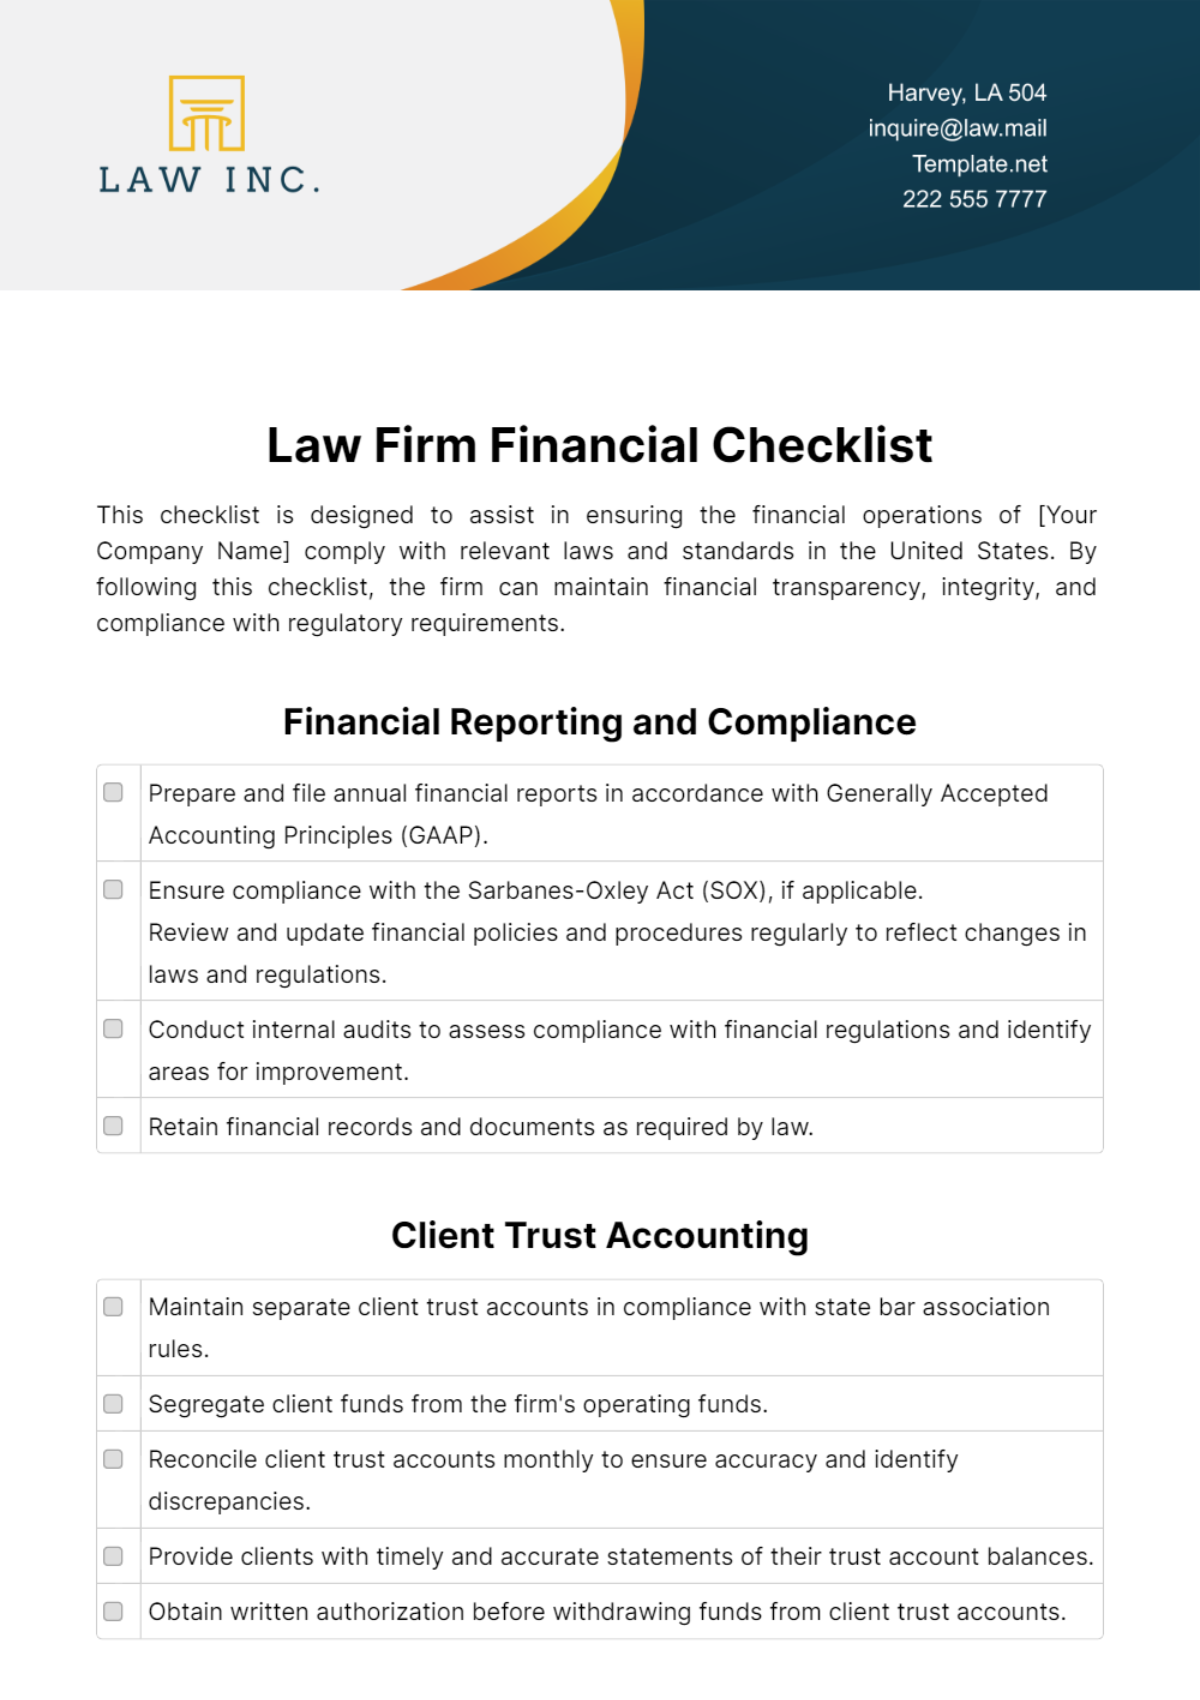 Law Firm Financial Checklist Template